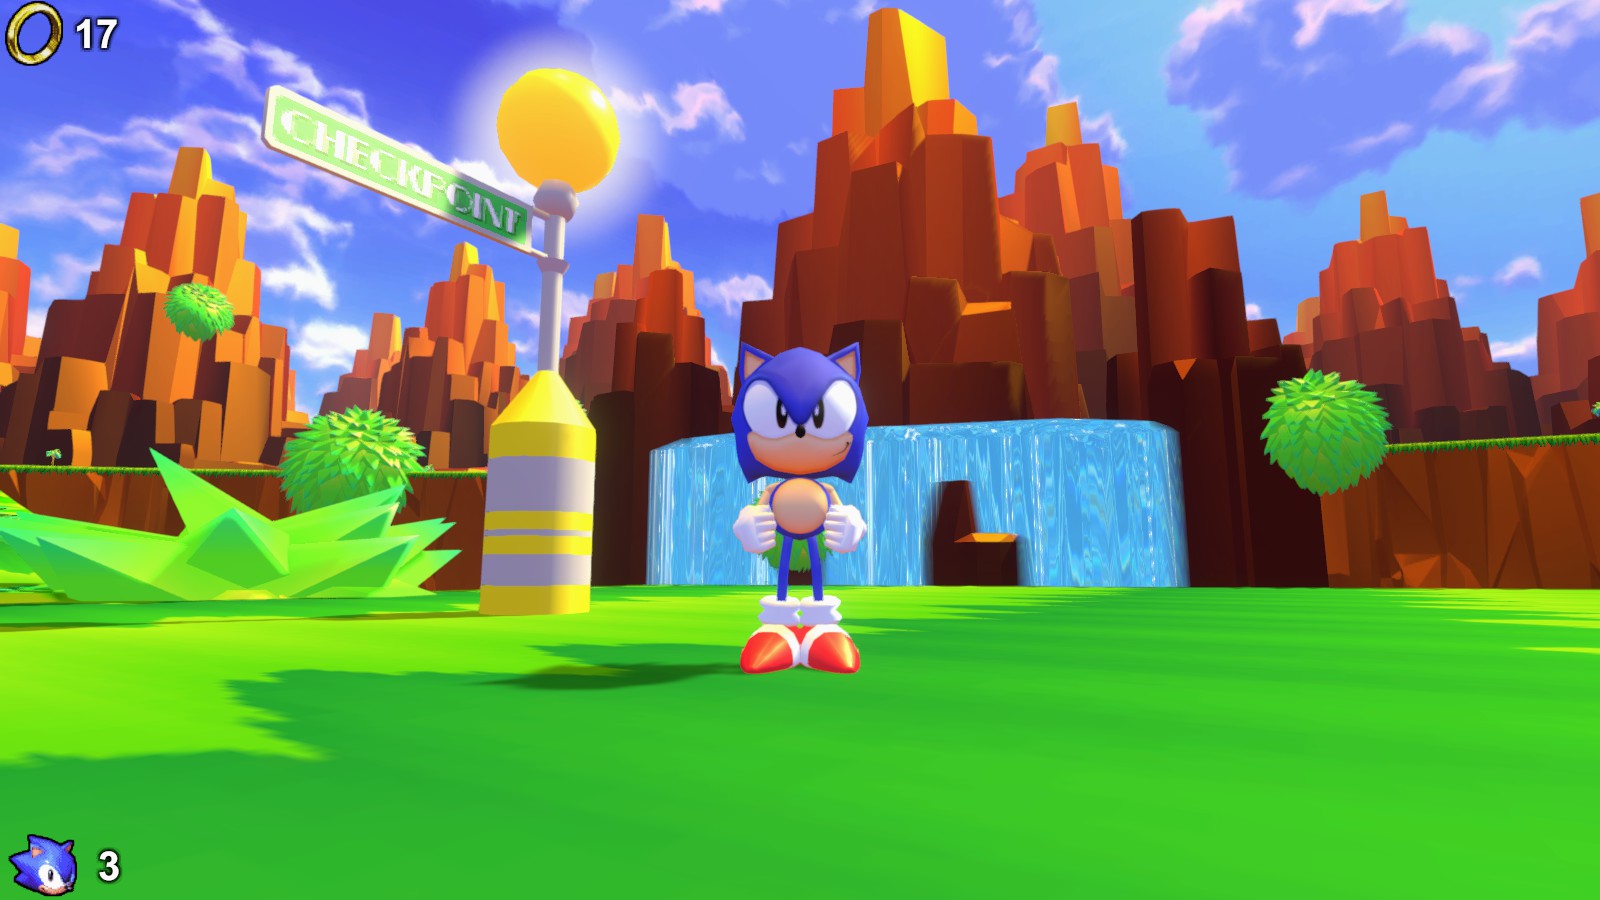 Sonic is back, baby! Relaxing by a checkpoint.